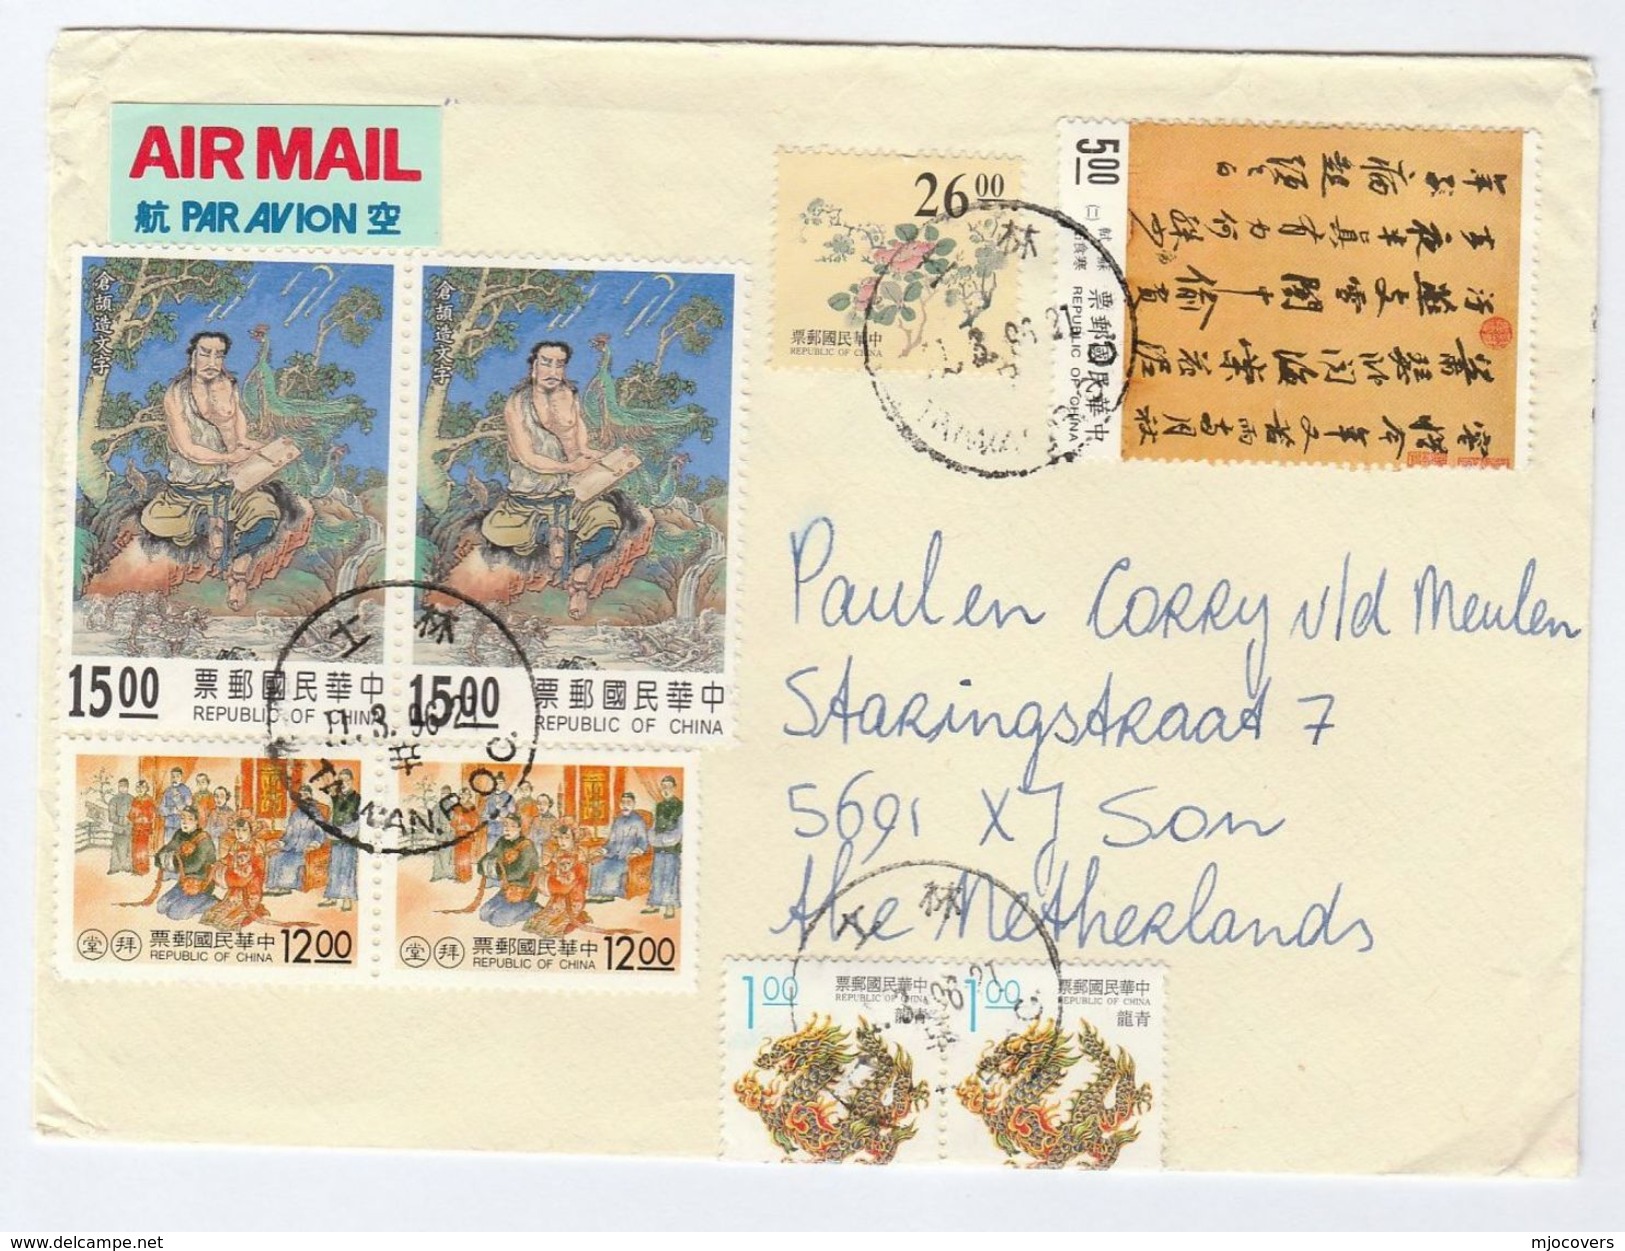 1996 Air Mail TAIWAN COVER Stamps COSTUME, ART, BIRD, Etc To Netherlands Airmail Label China - Lettres & Documents